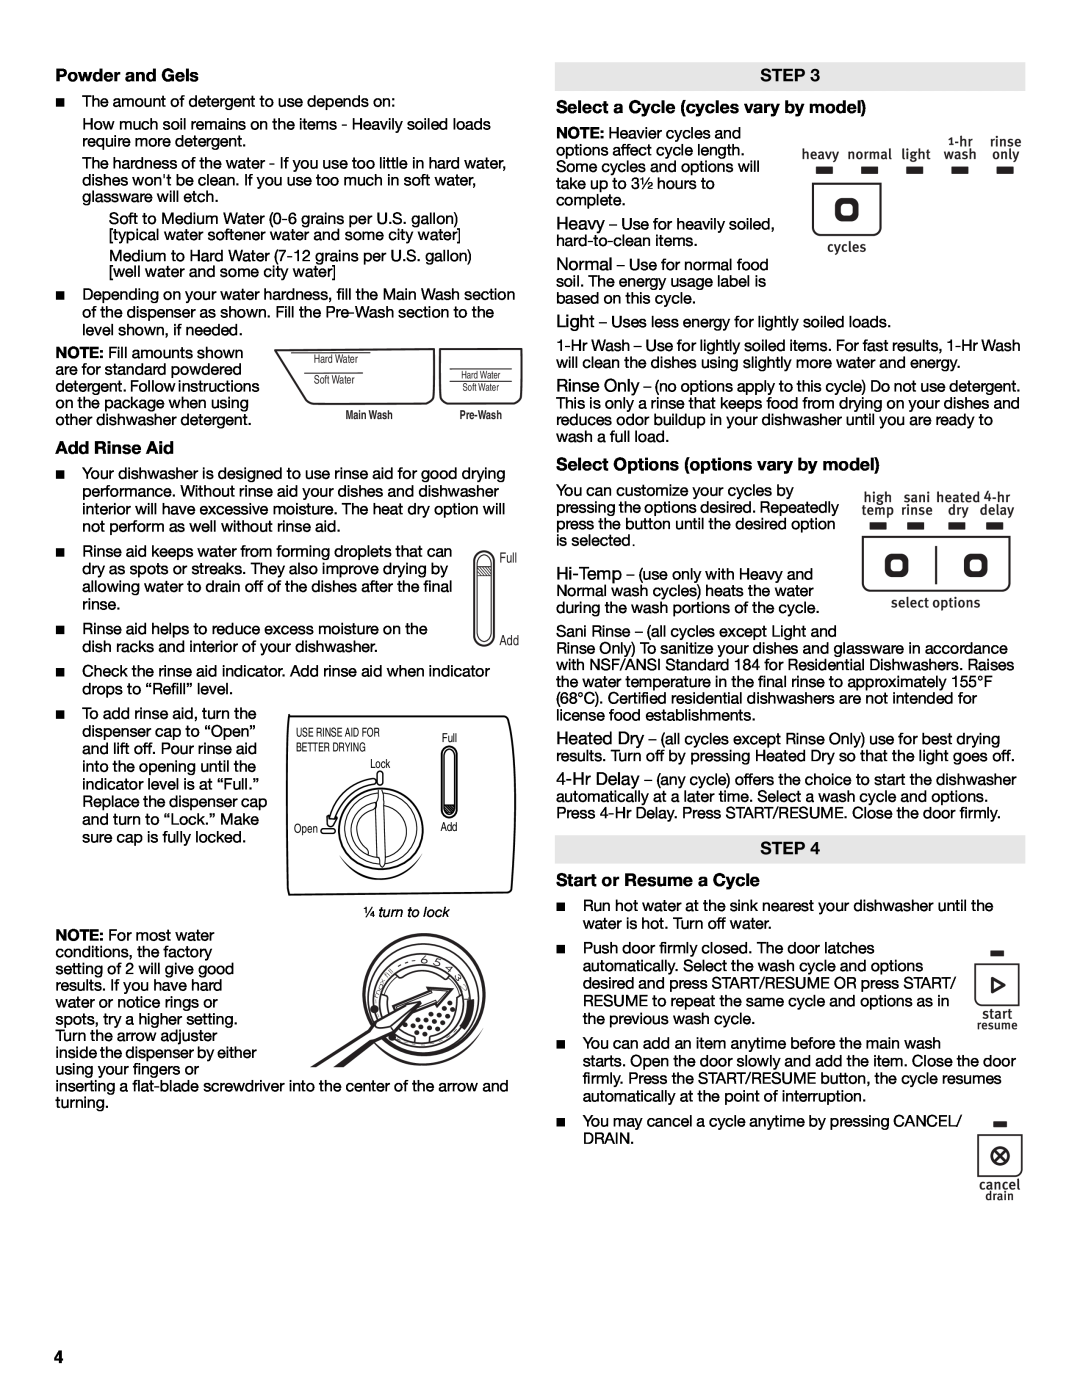 Maytag W10438305A Powder and Gels, Add Rinse Aid, STEP Select a Cycle cycles vary by model, STEP Start or Resume a Cycle 